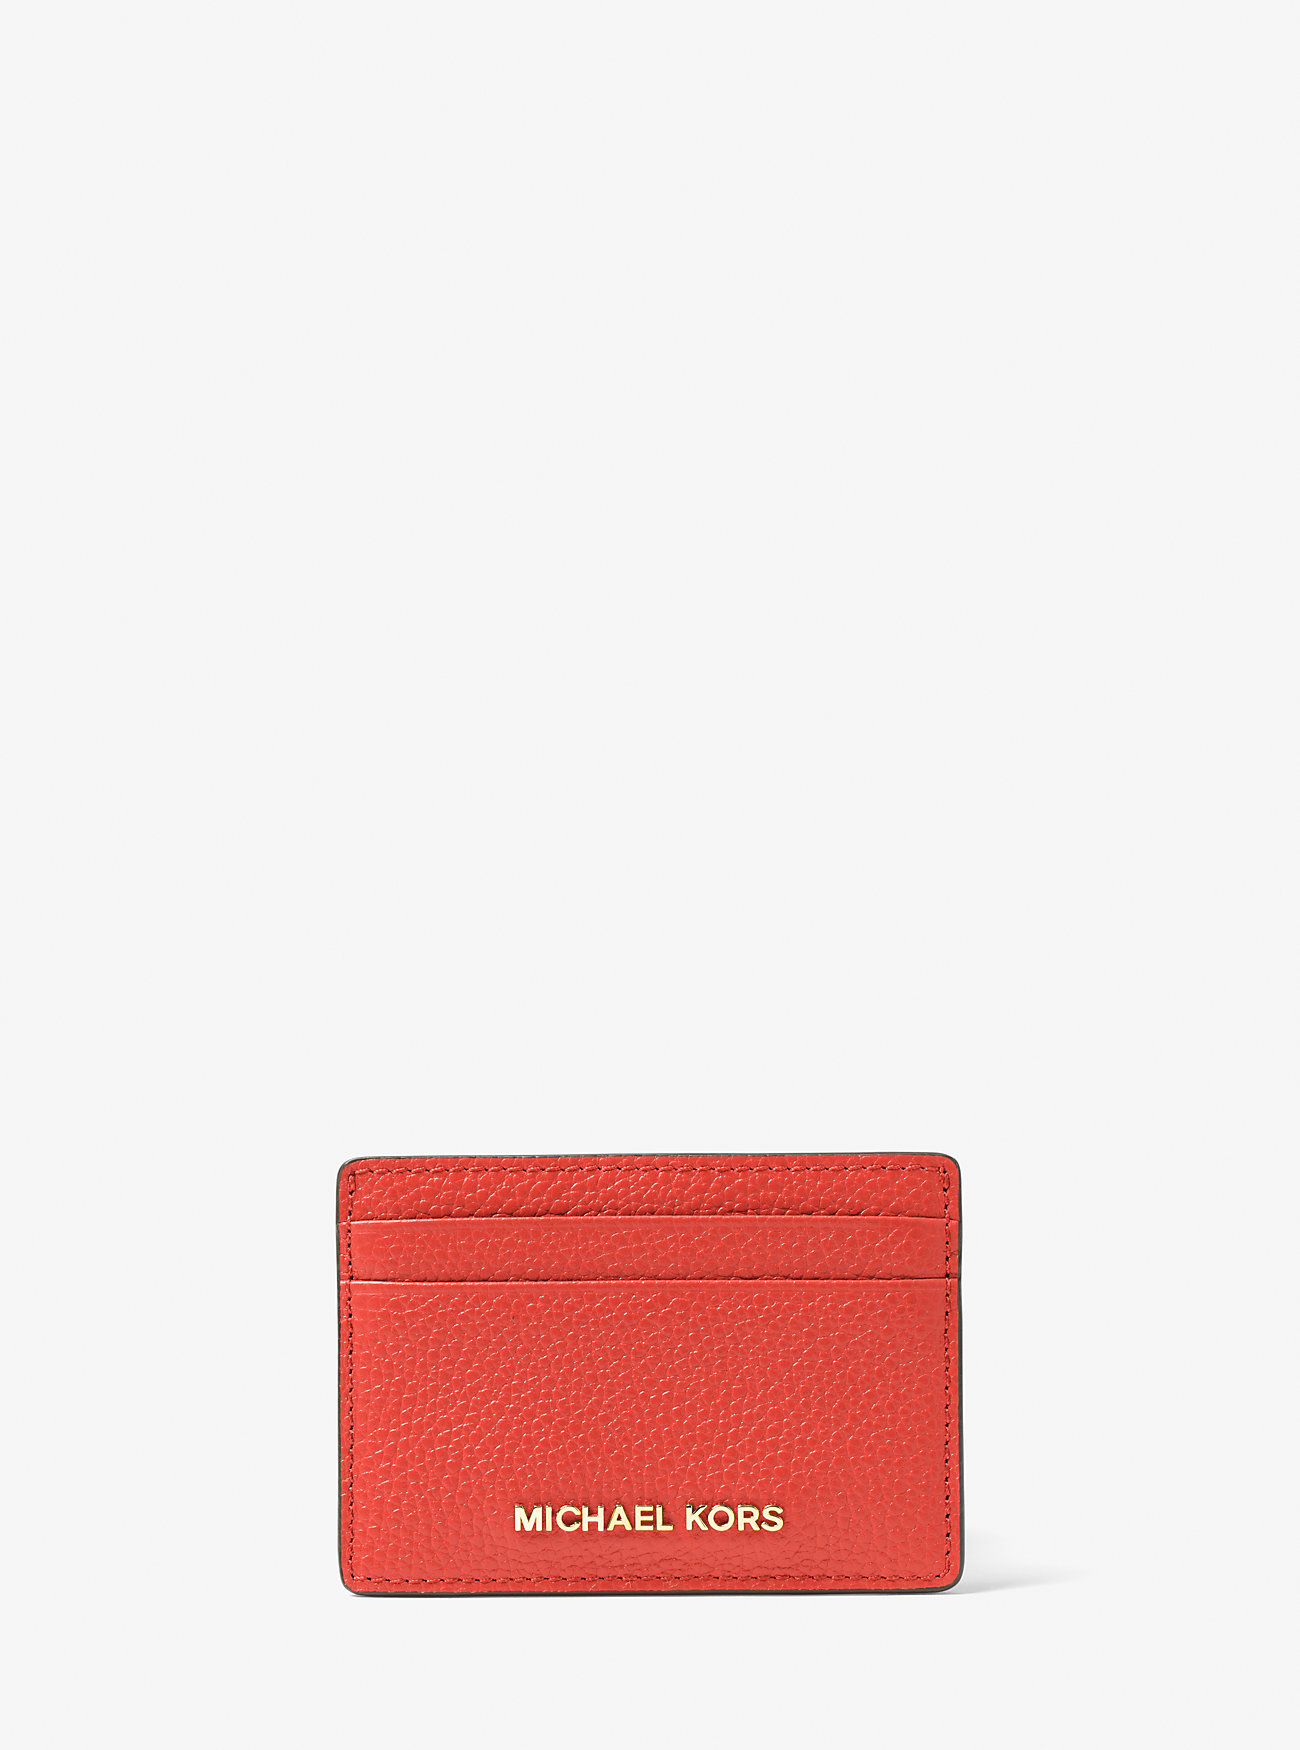 Michaelkors Pebbled Leather Card Case